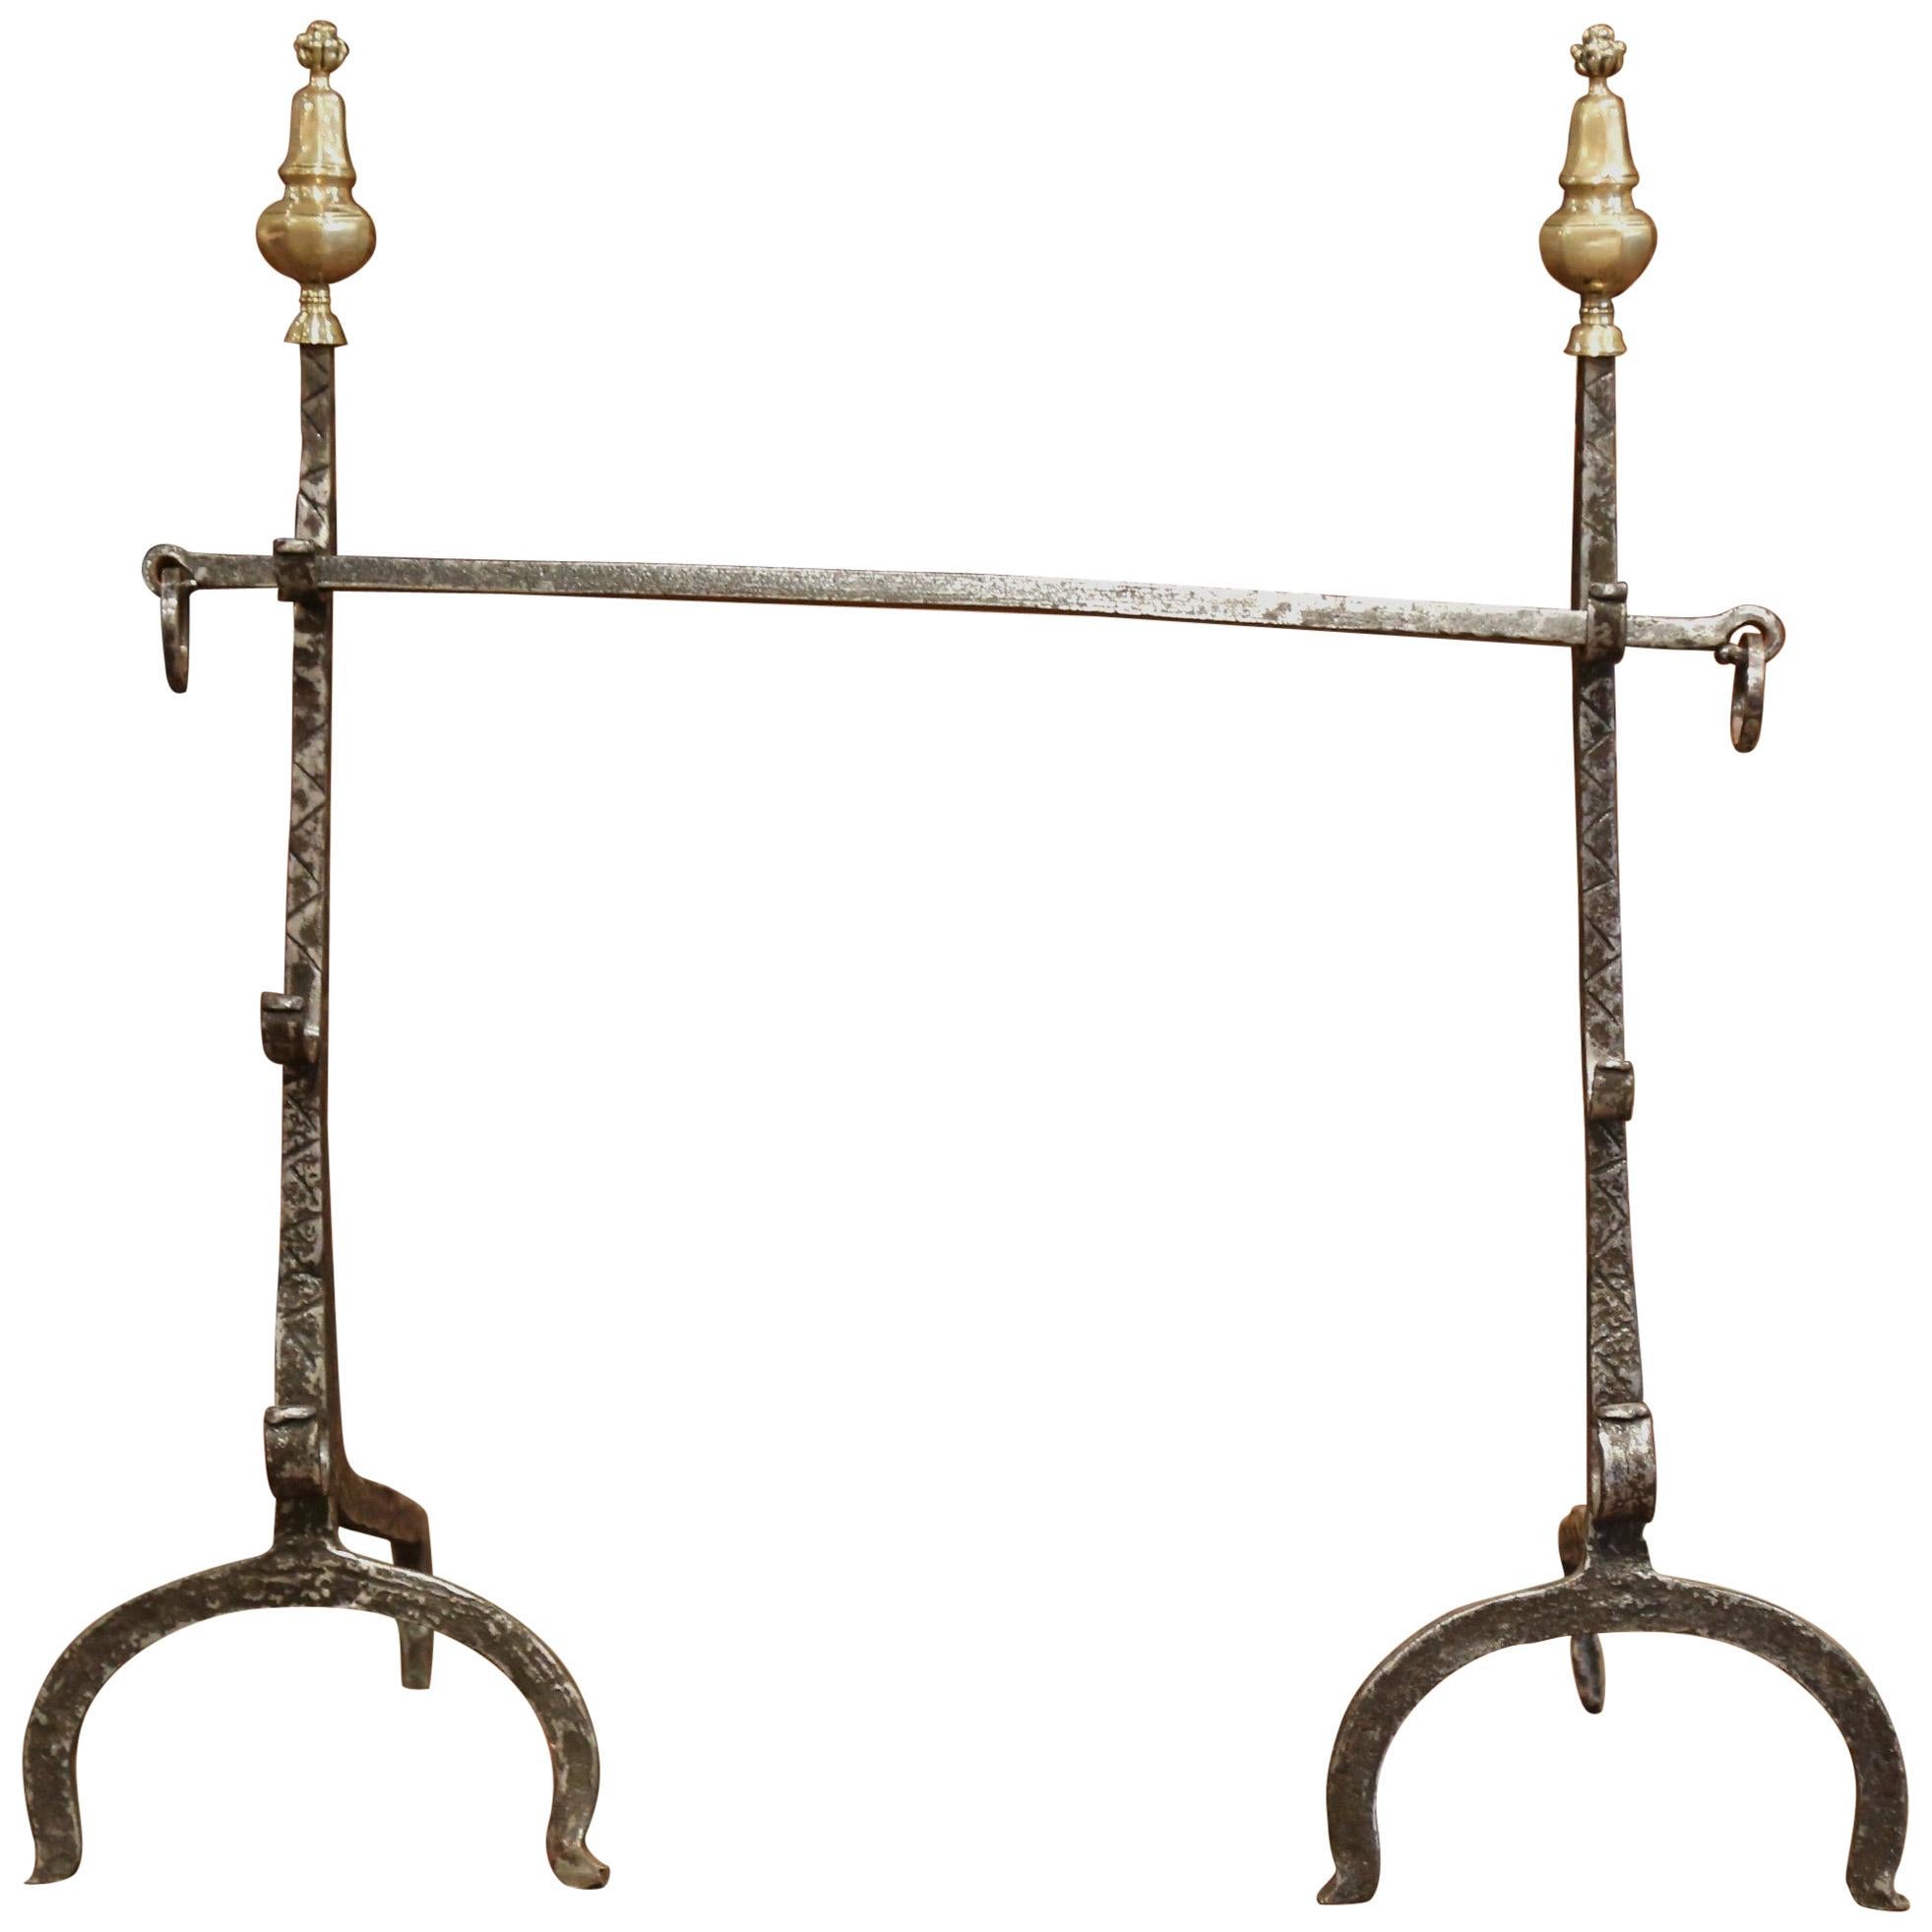 Pair of 17th Century French Polished Forged Iron and Bronze Fireplace Andirons